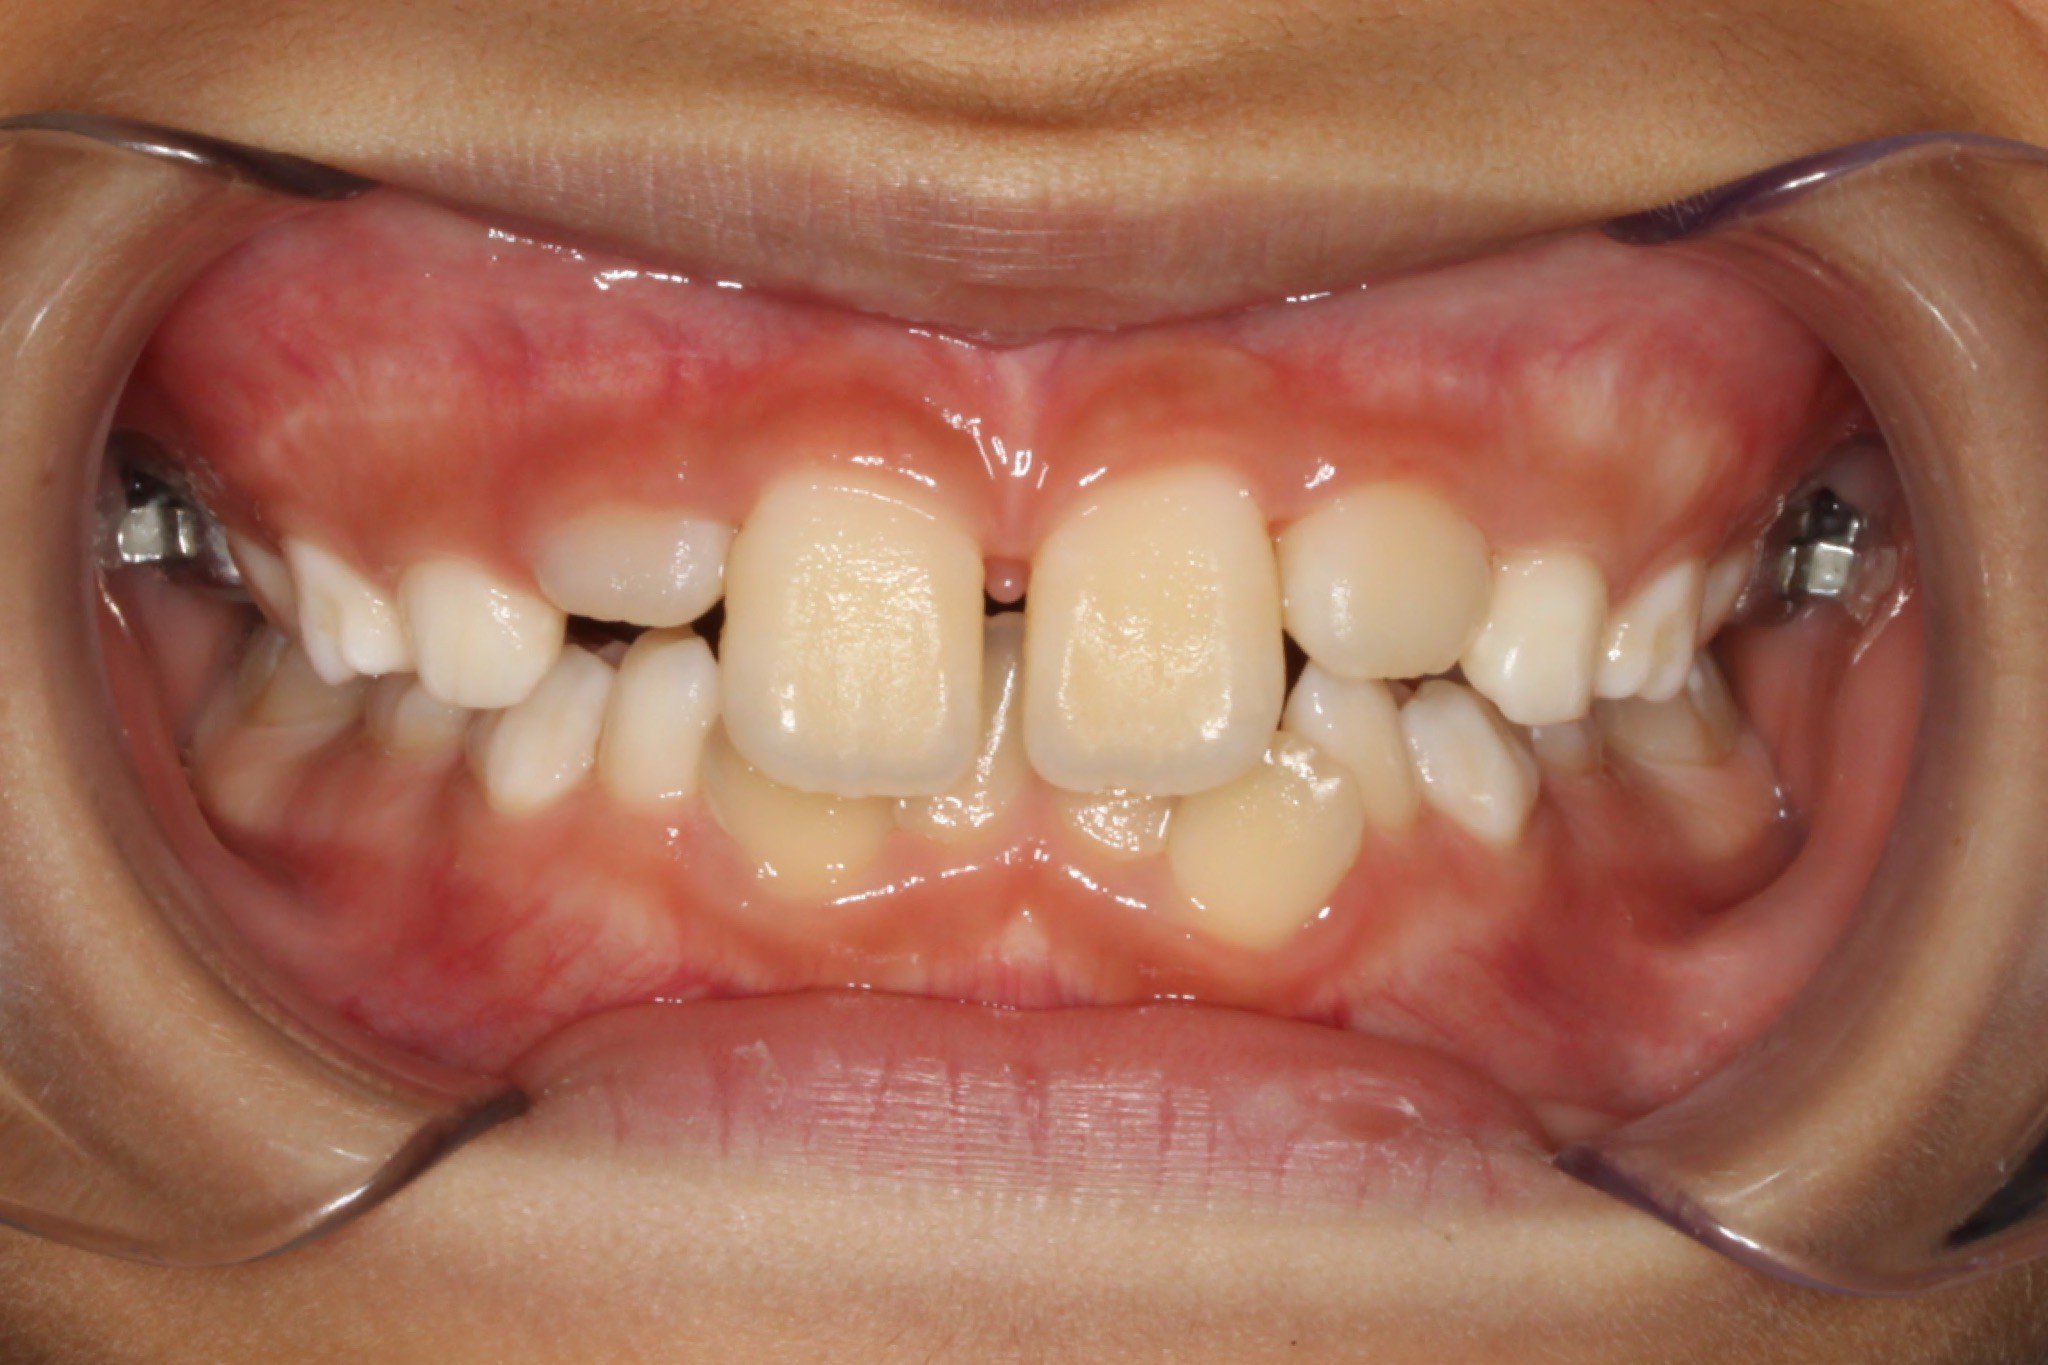 Before photo: Partially erupted and gappy upper teeth